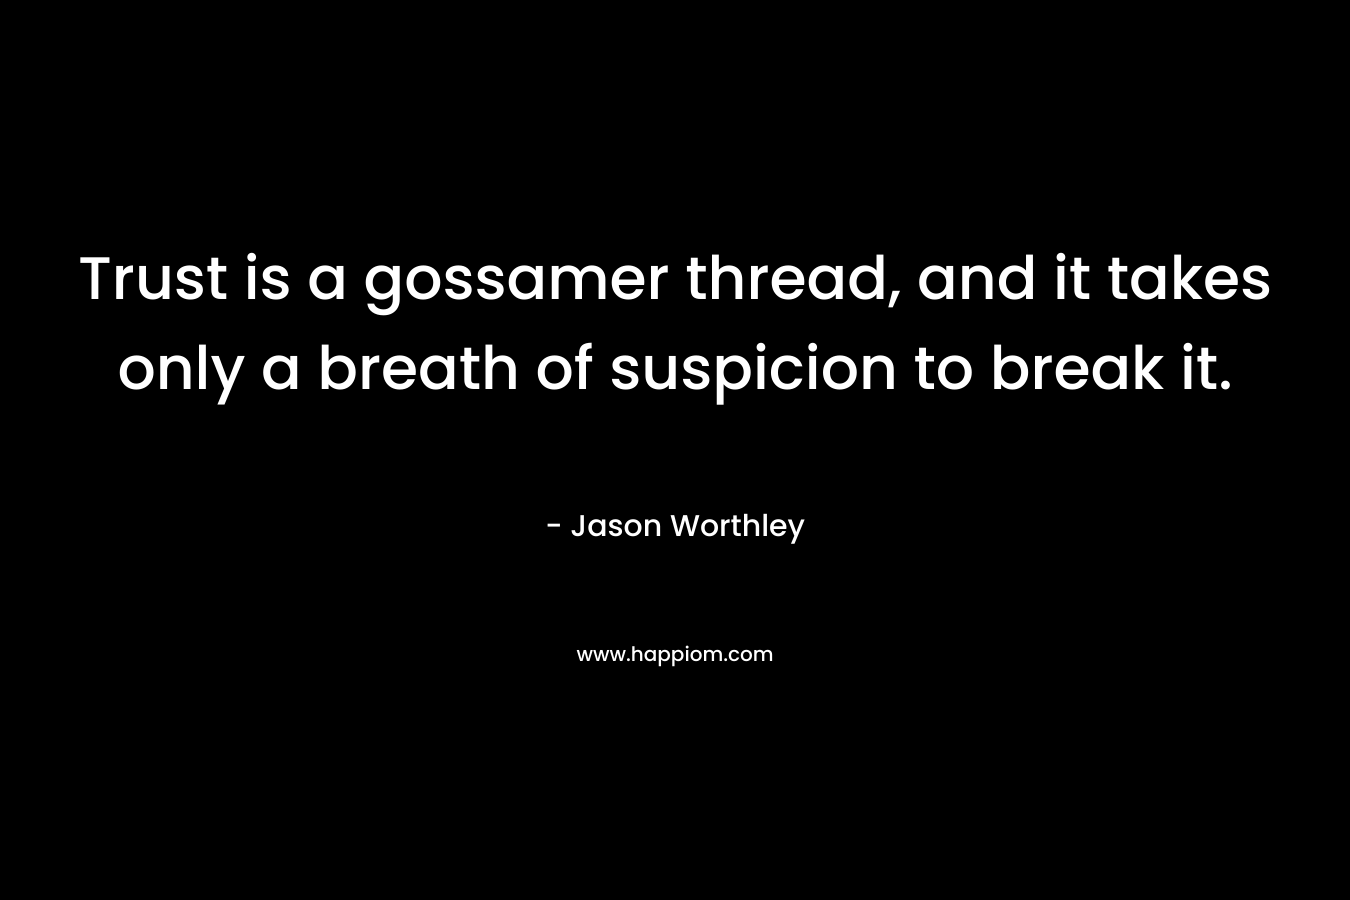 Trust is a gossamer thread, and it takes only a breath of suspicion to break it. – Jason Worthley